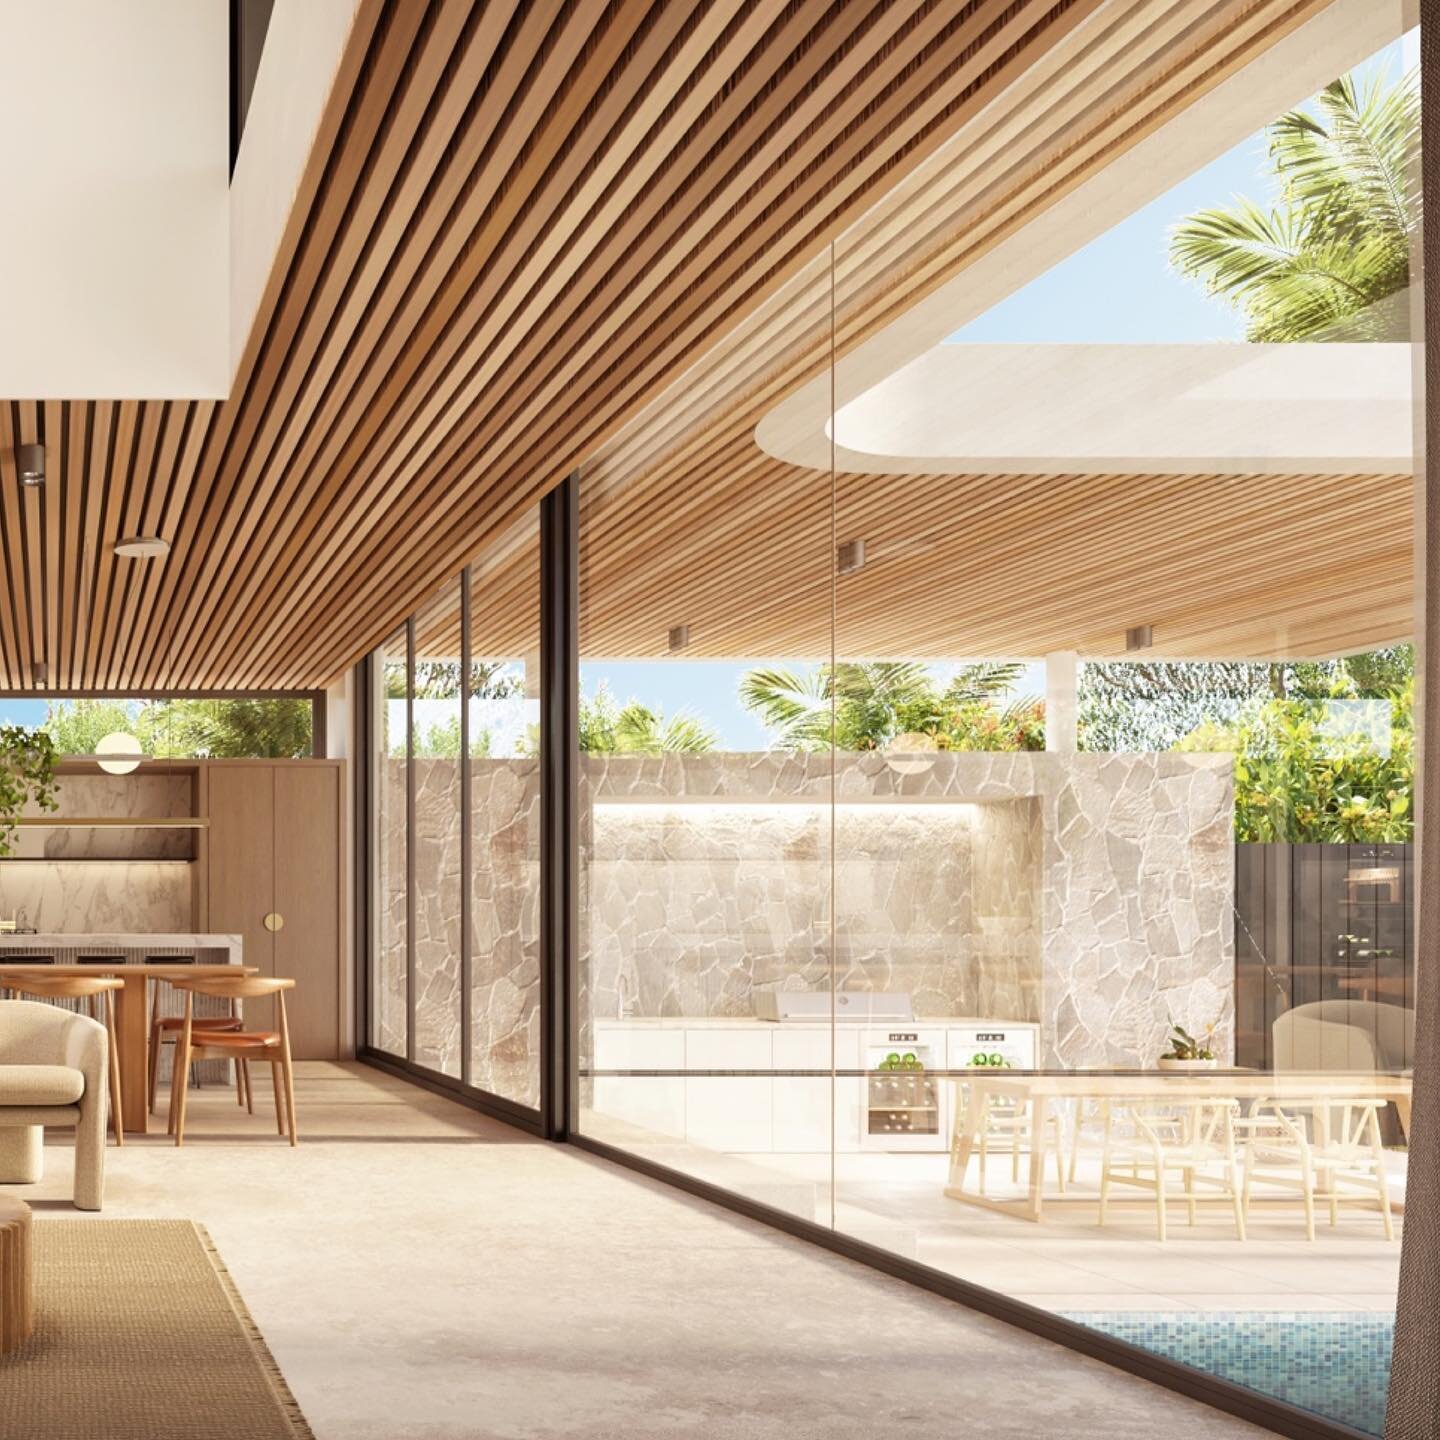 12 Binaville Ave, Burraneer

Featuring layered details and a simple yet rich palette of materials including timber and off form concrete to deliver a resort-style finish.

Construction has officially commenced on this award-winning duplex project - k